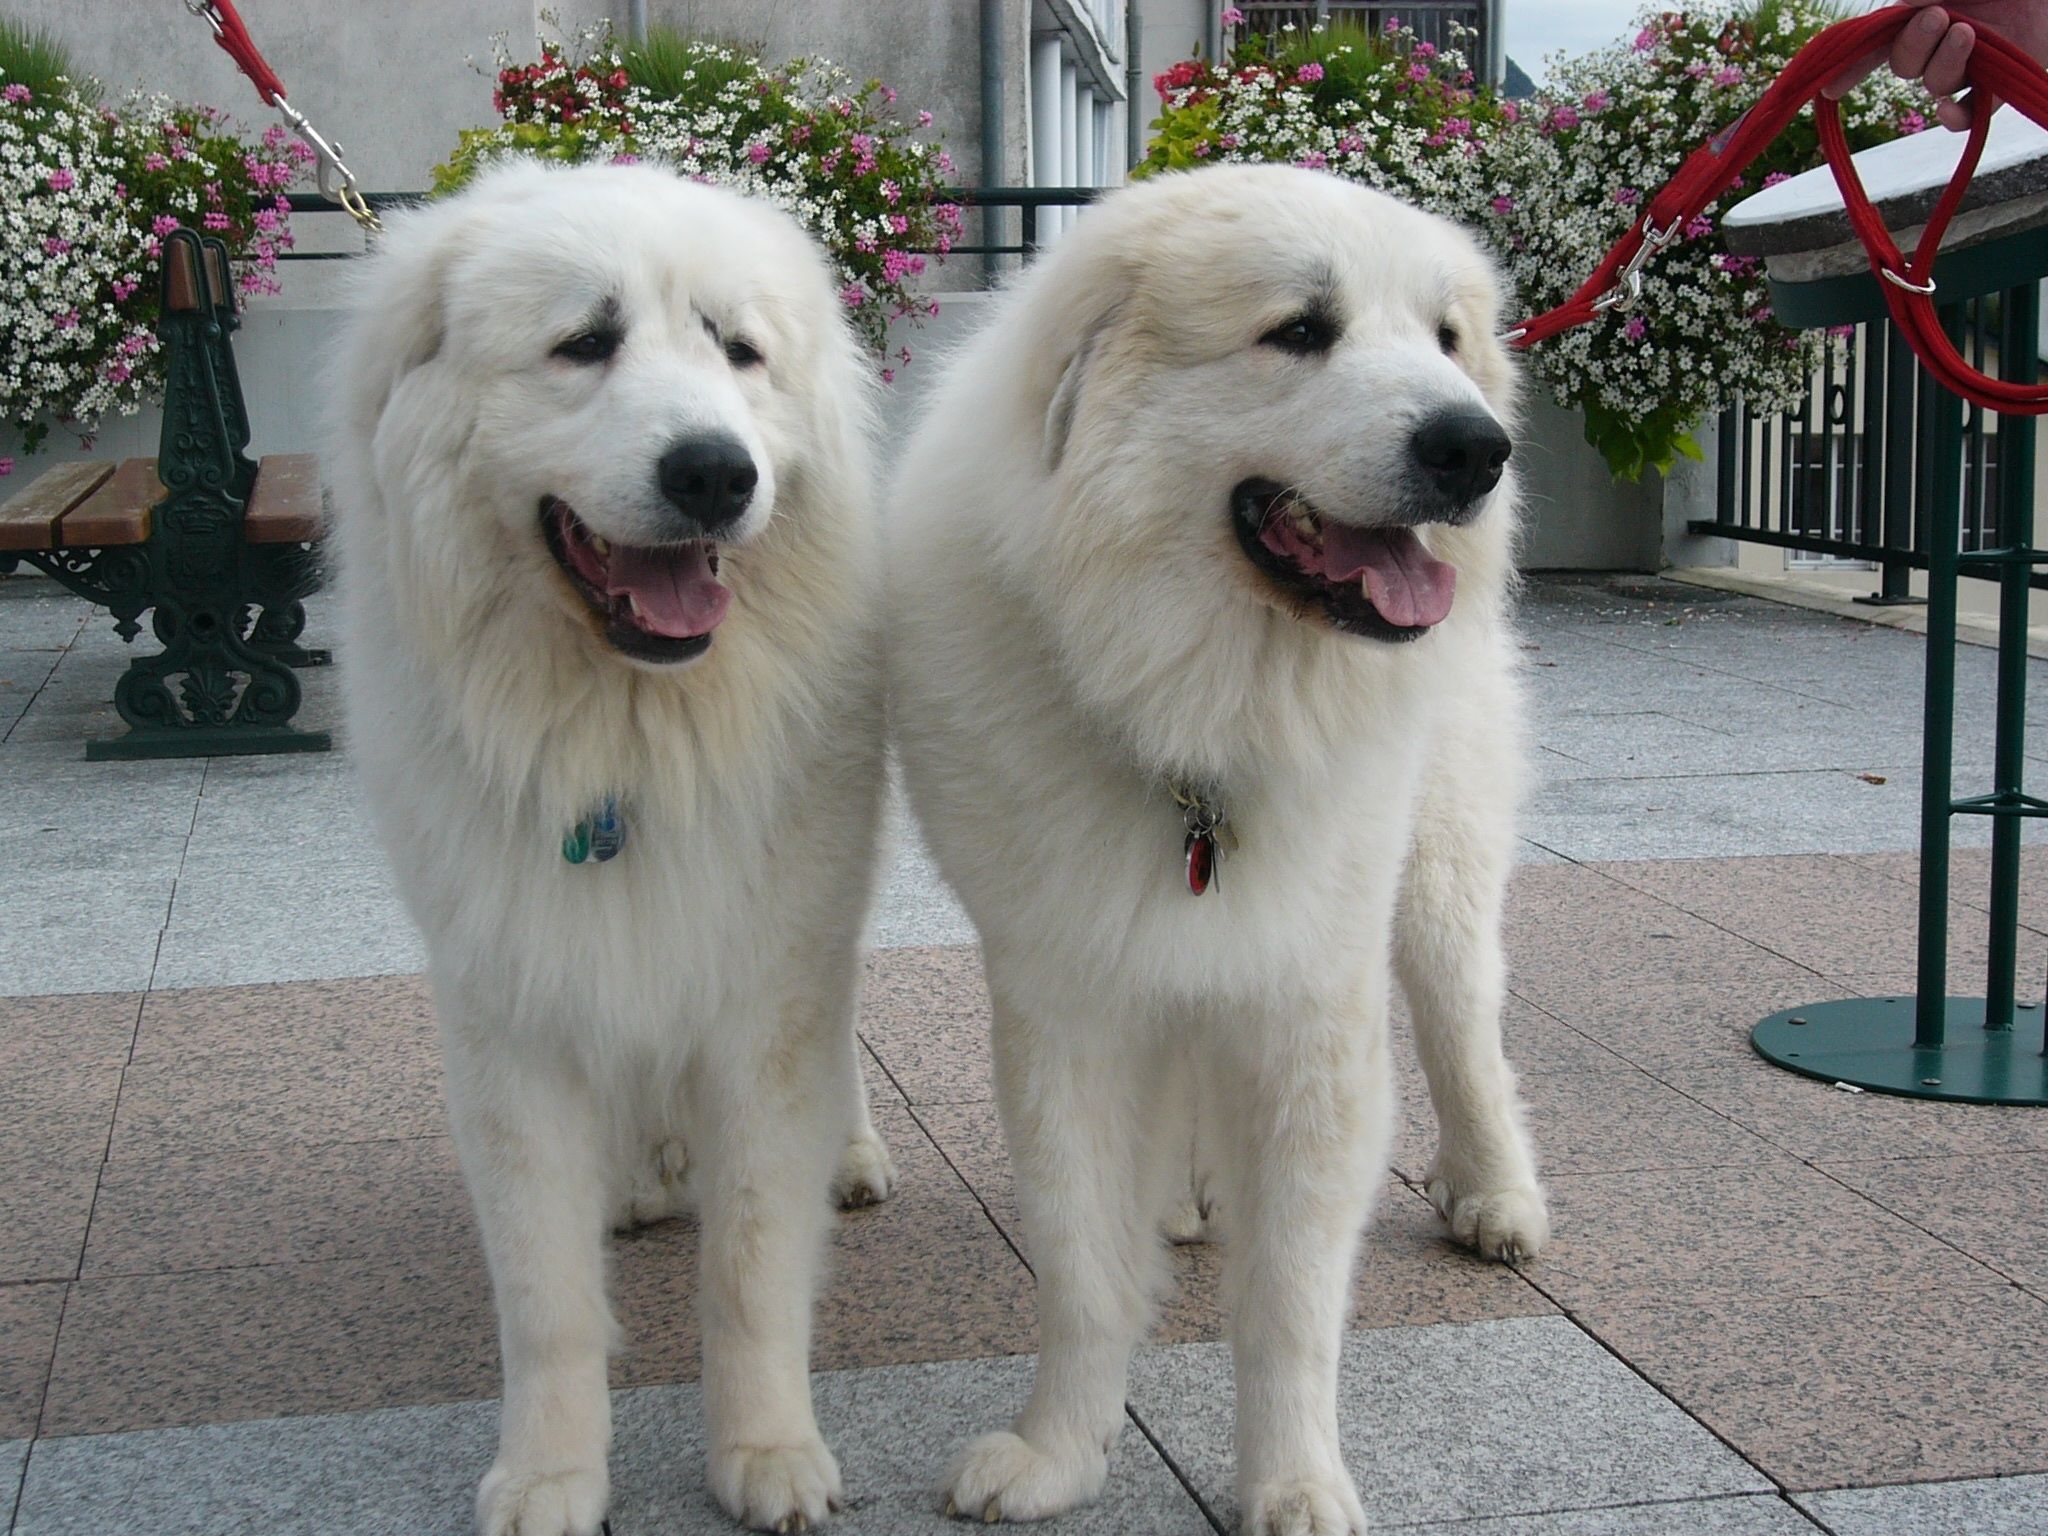 Two Great Pyrenees dogs. Great pyrenees dog, Great pyrenees, Pyrenees